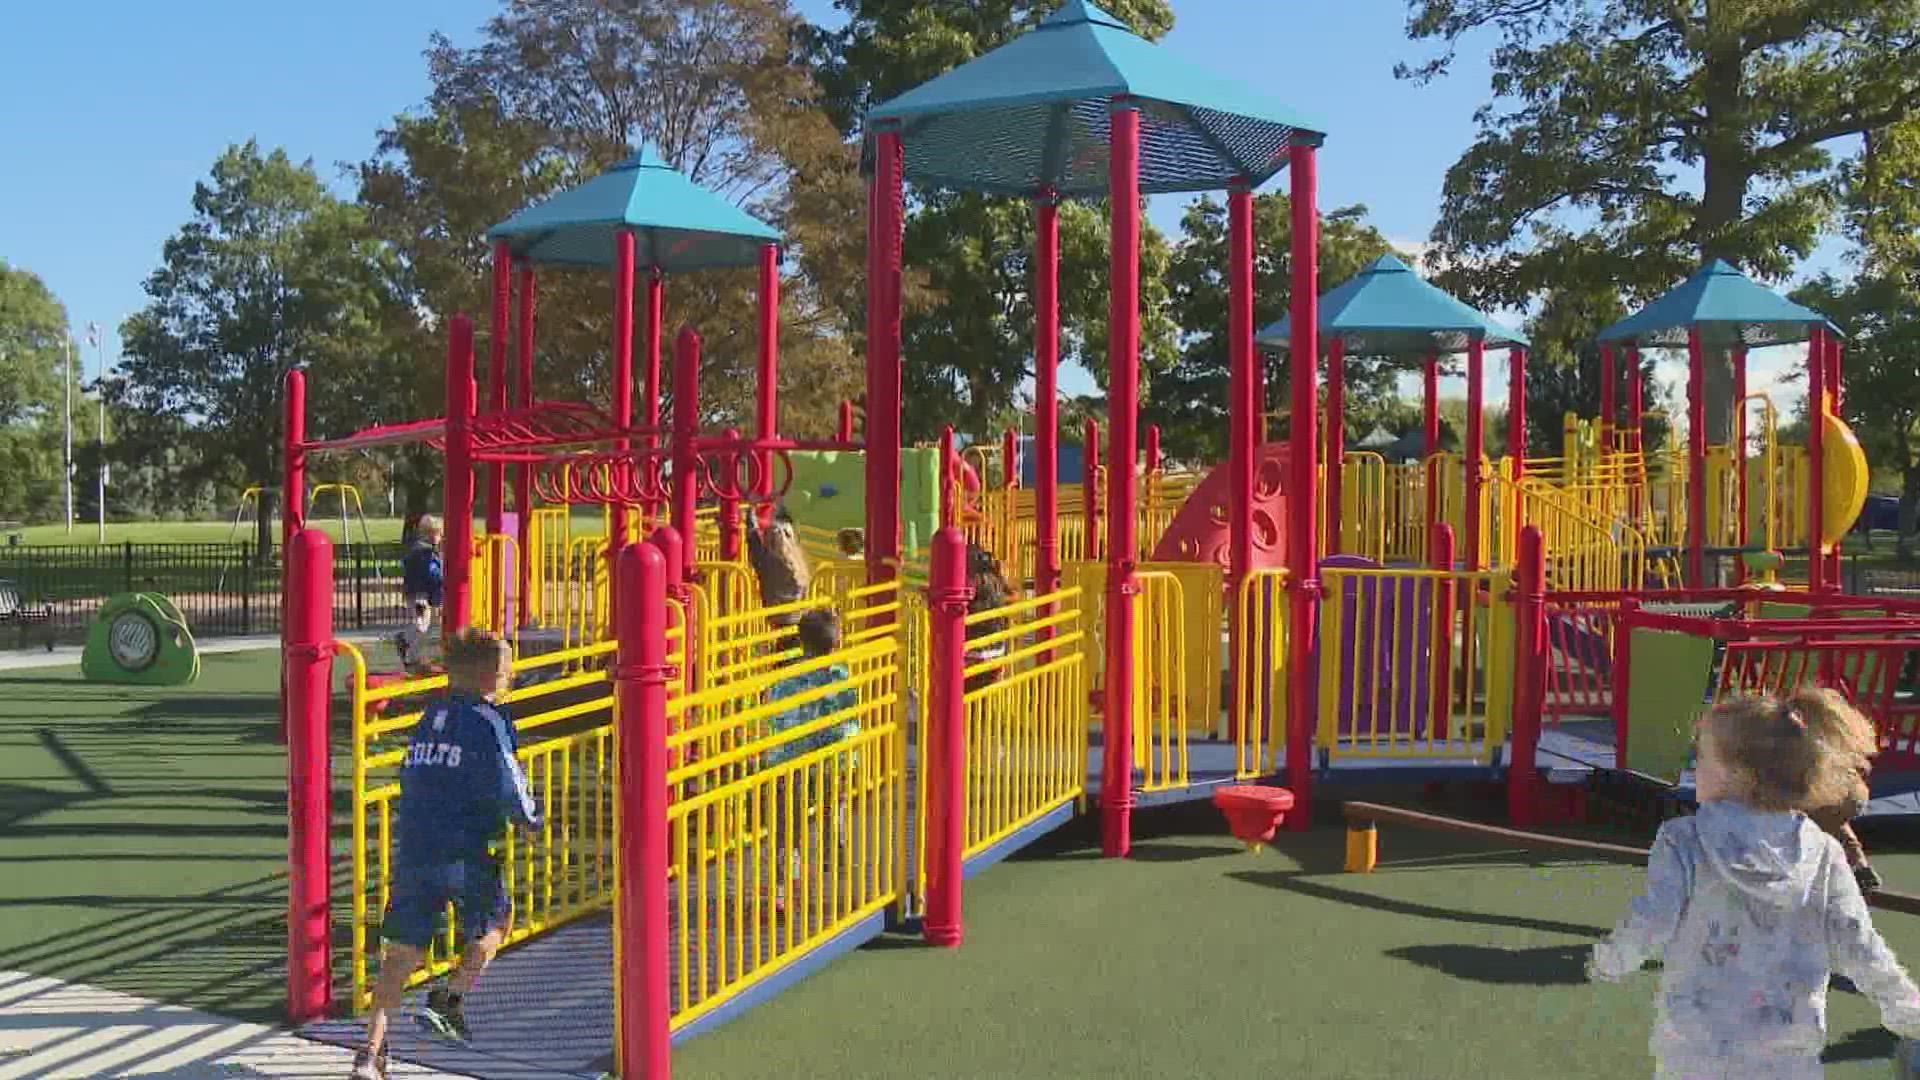 The first all-inclusive park held its ribbon cutting today. This equipment enables children of all abilities to play.